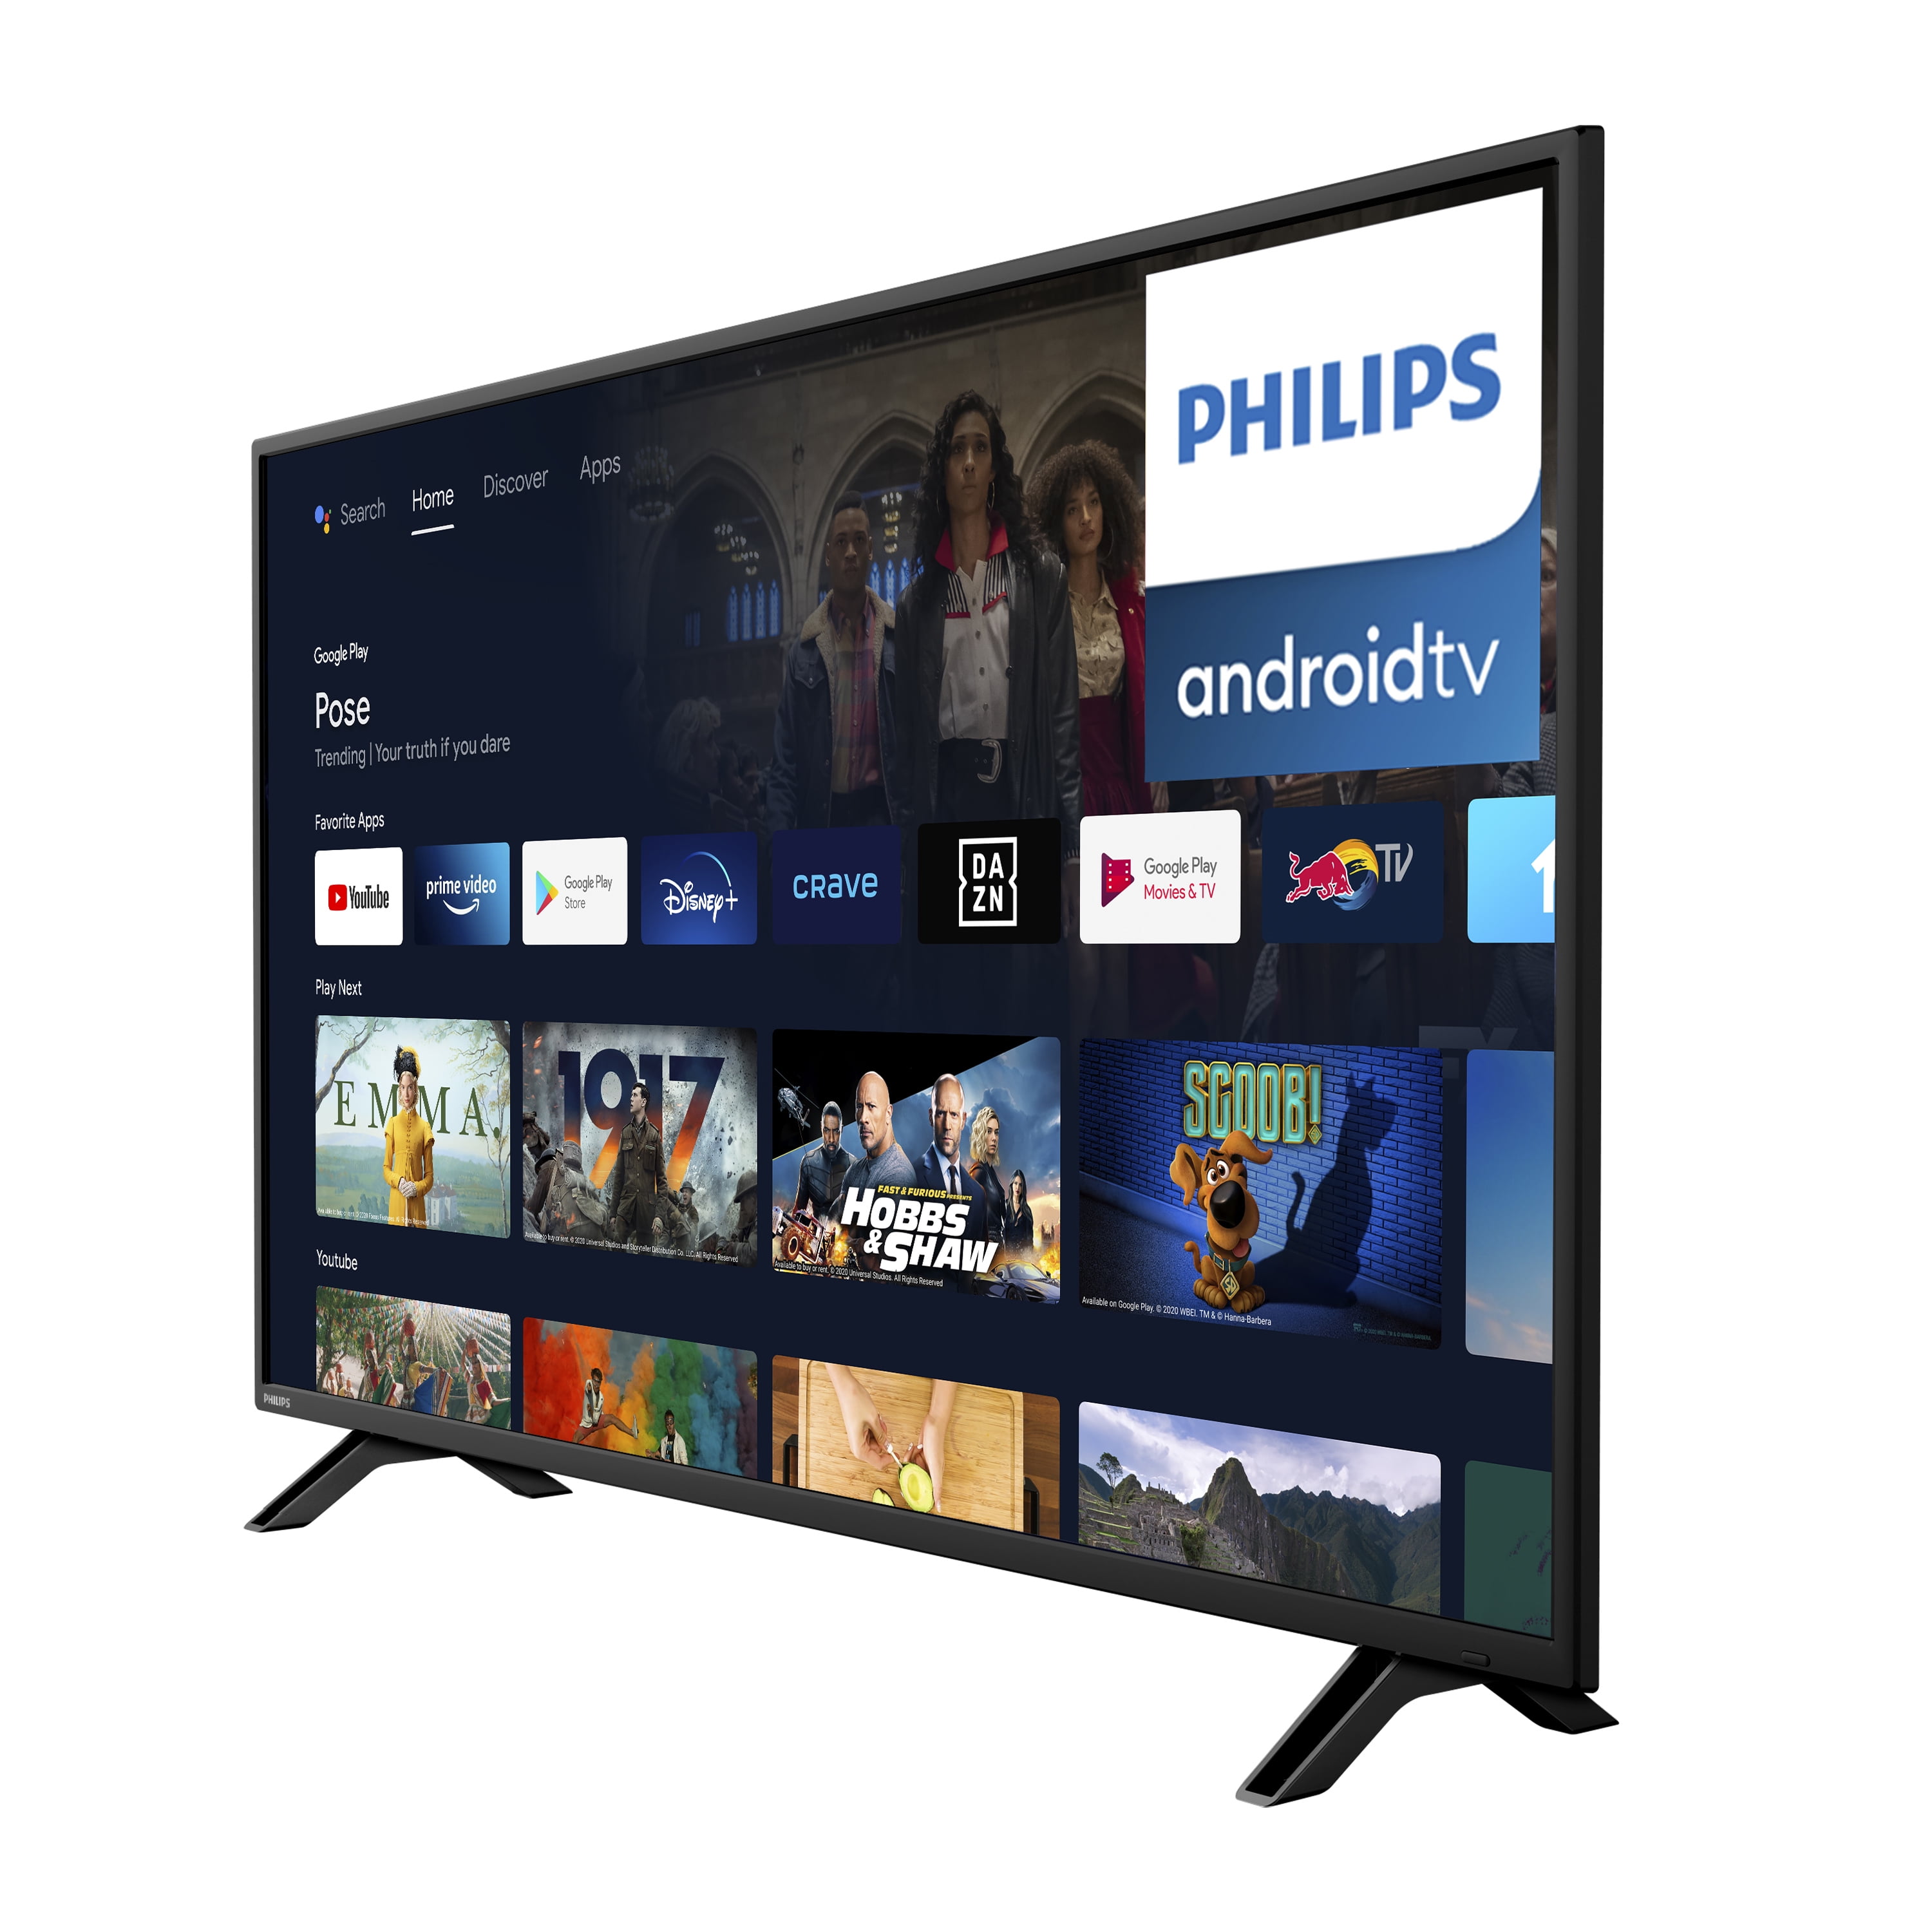 Philips Class Ultra HD (2160P) Android Smart LED TV with Assistant (43PFL5766/F6) - Walmart.com